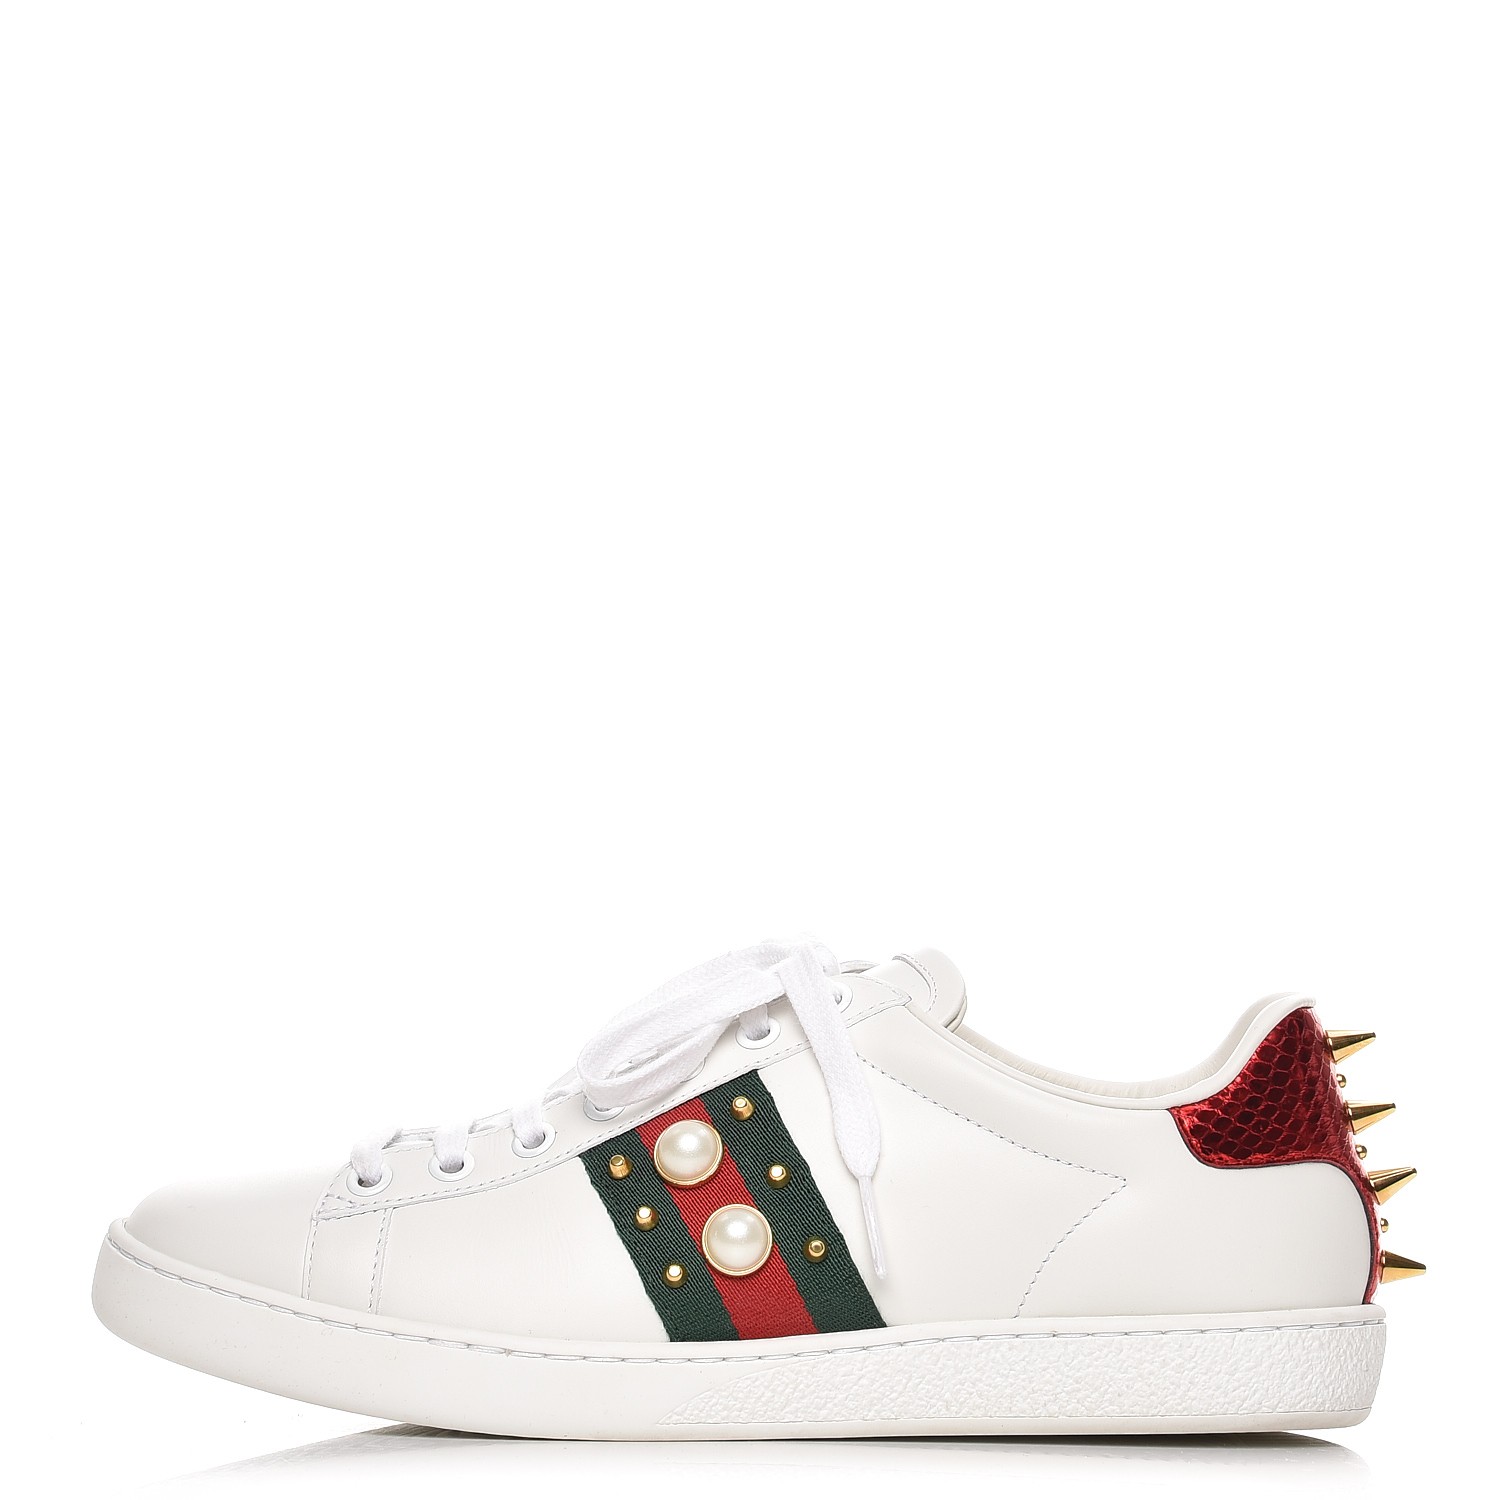 GUCCI Calfskin Web Studded Ace Sneakers 38 White 224786